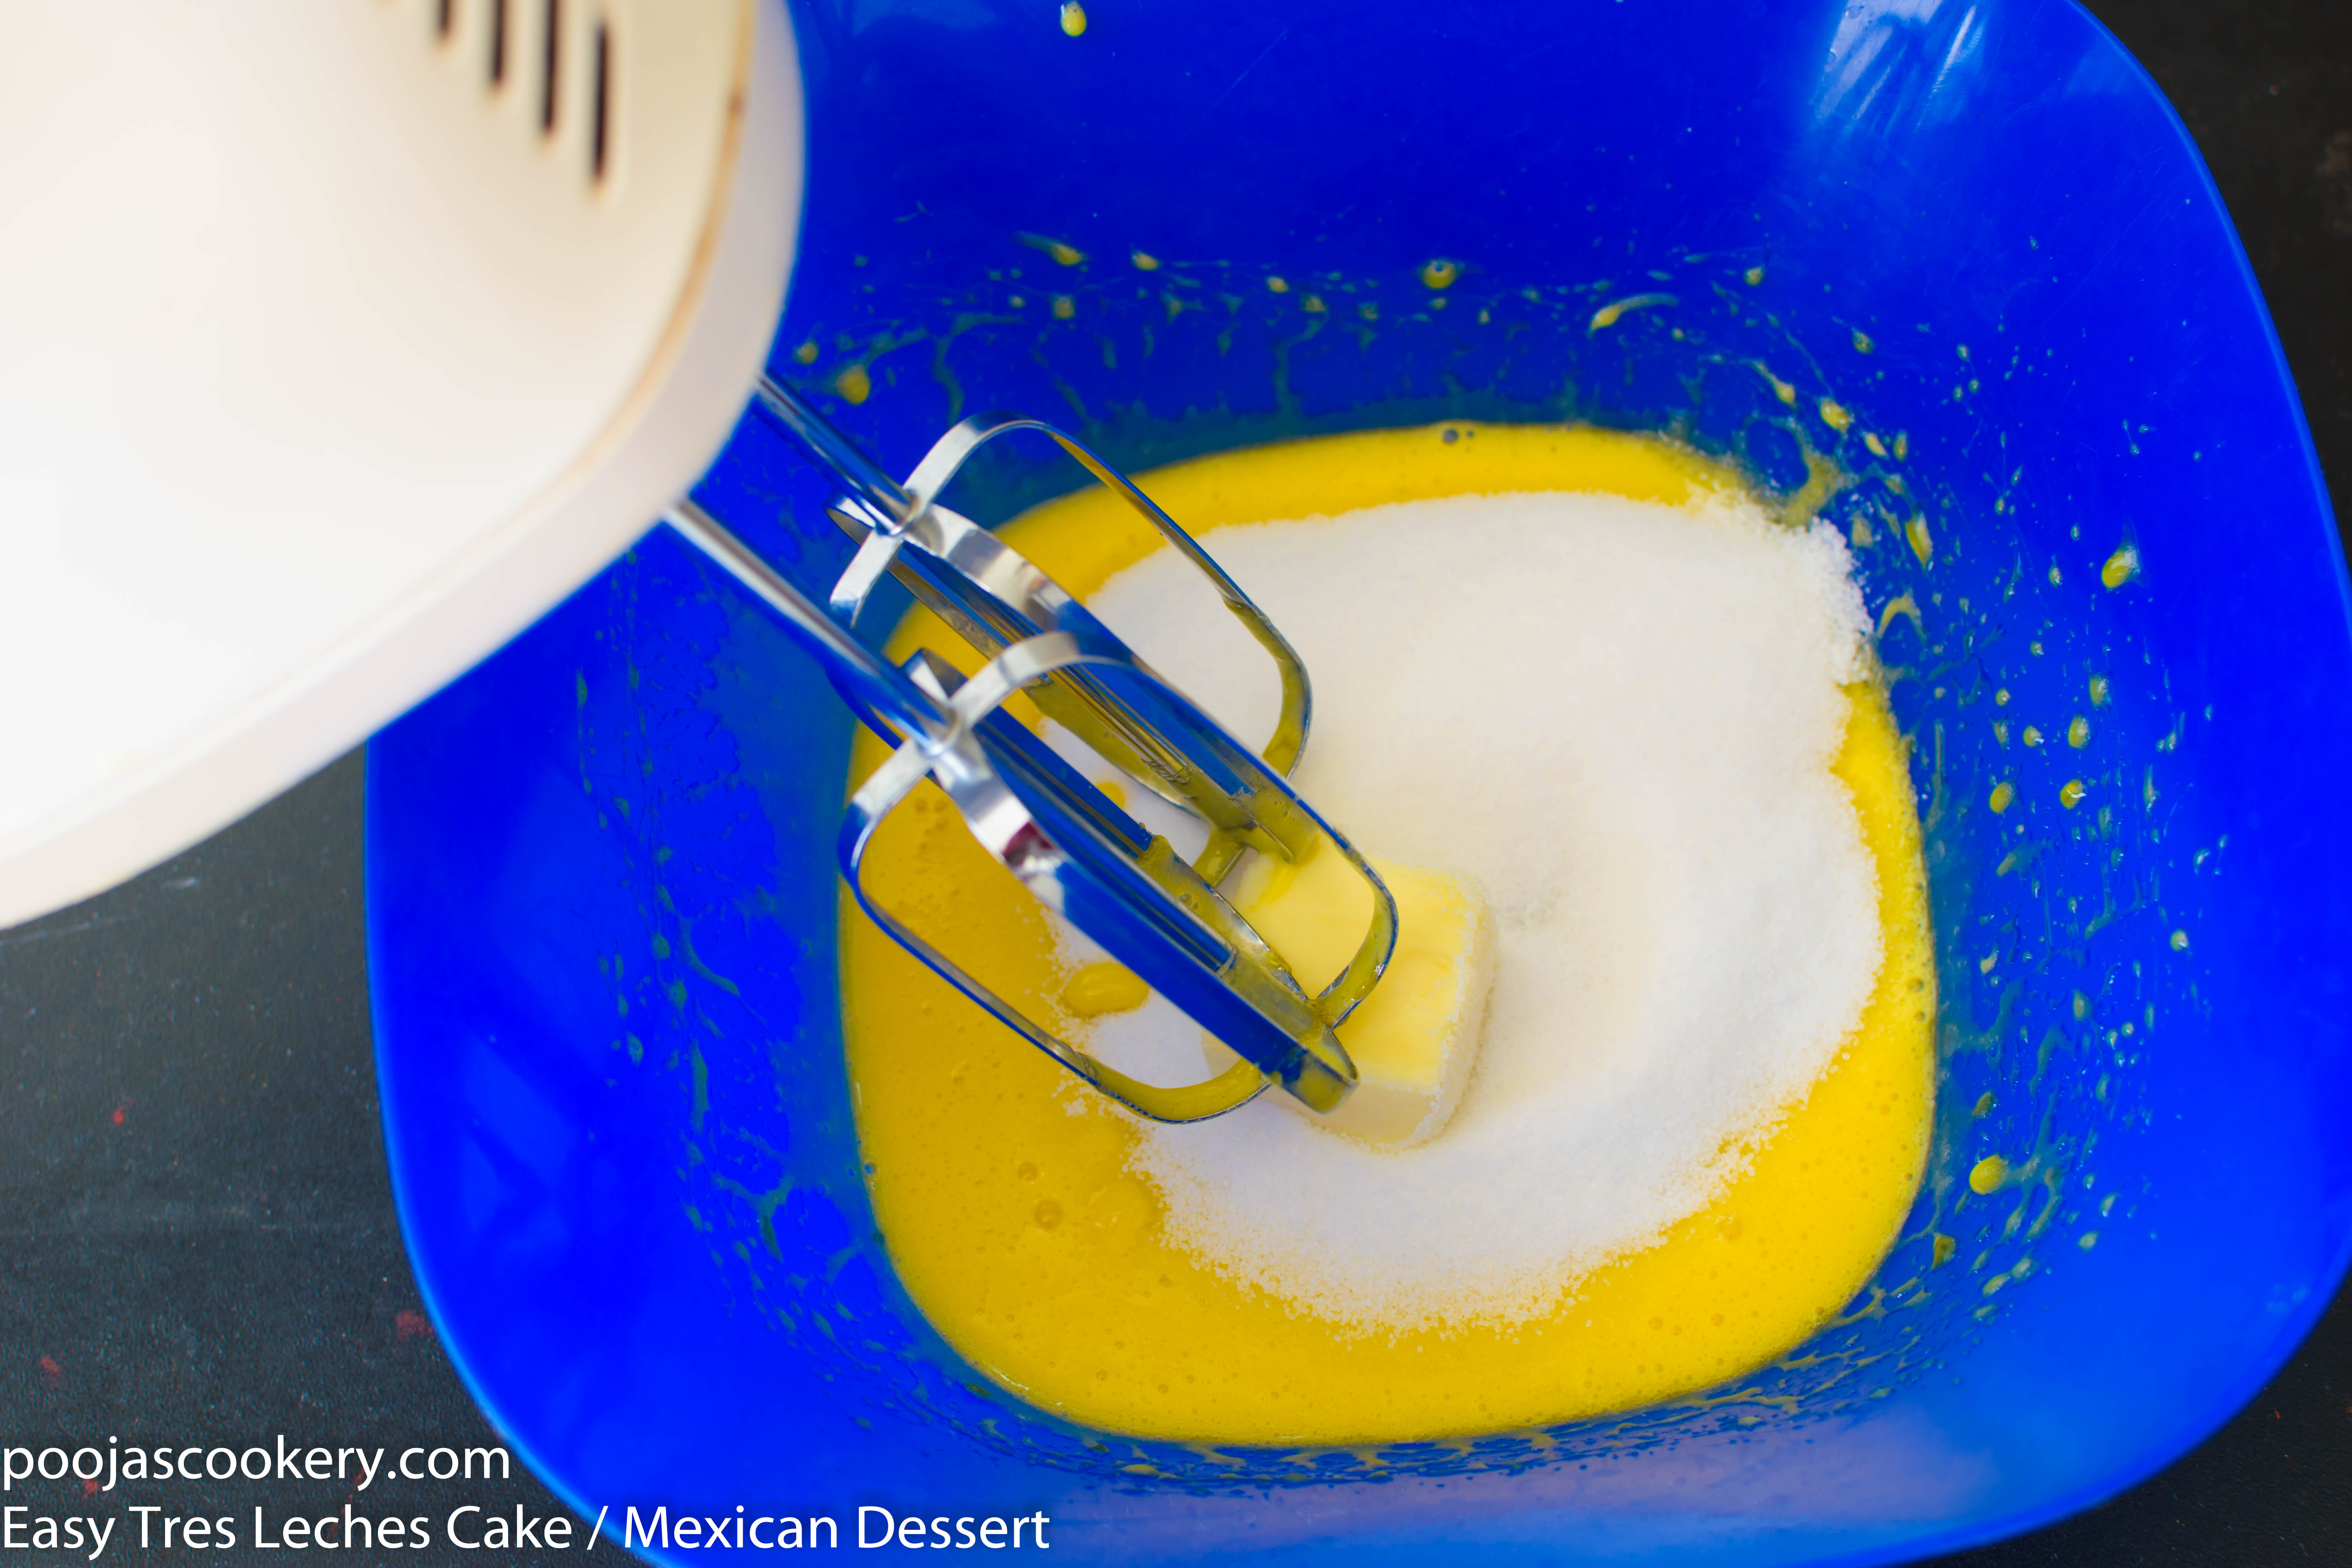 Sugar and butter into beaten egg yolks